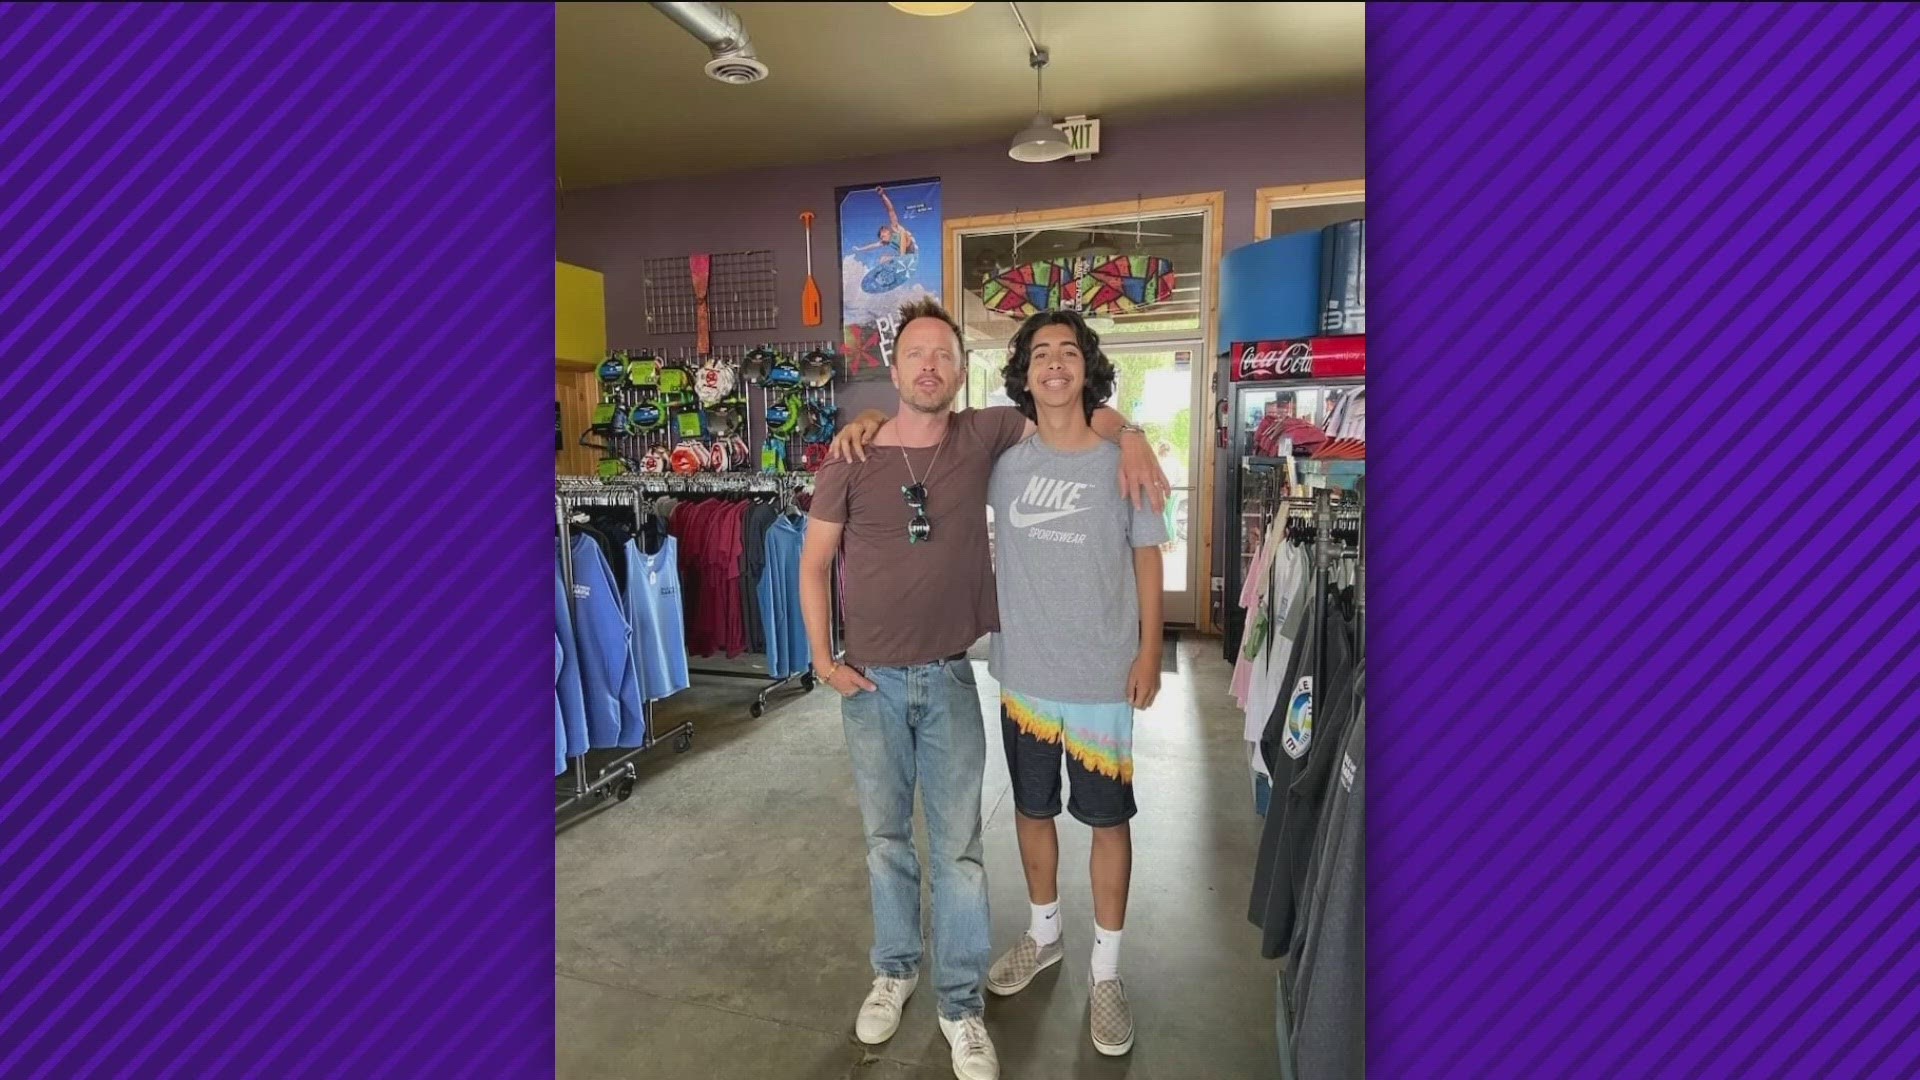 The teenagers from Boise and McCall were at the Mile High Marina when they ran into the superstar and Idaho native. They shared their celebrity experience with KTVB.